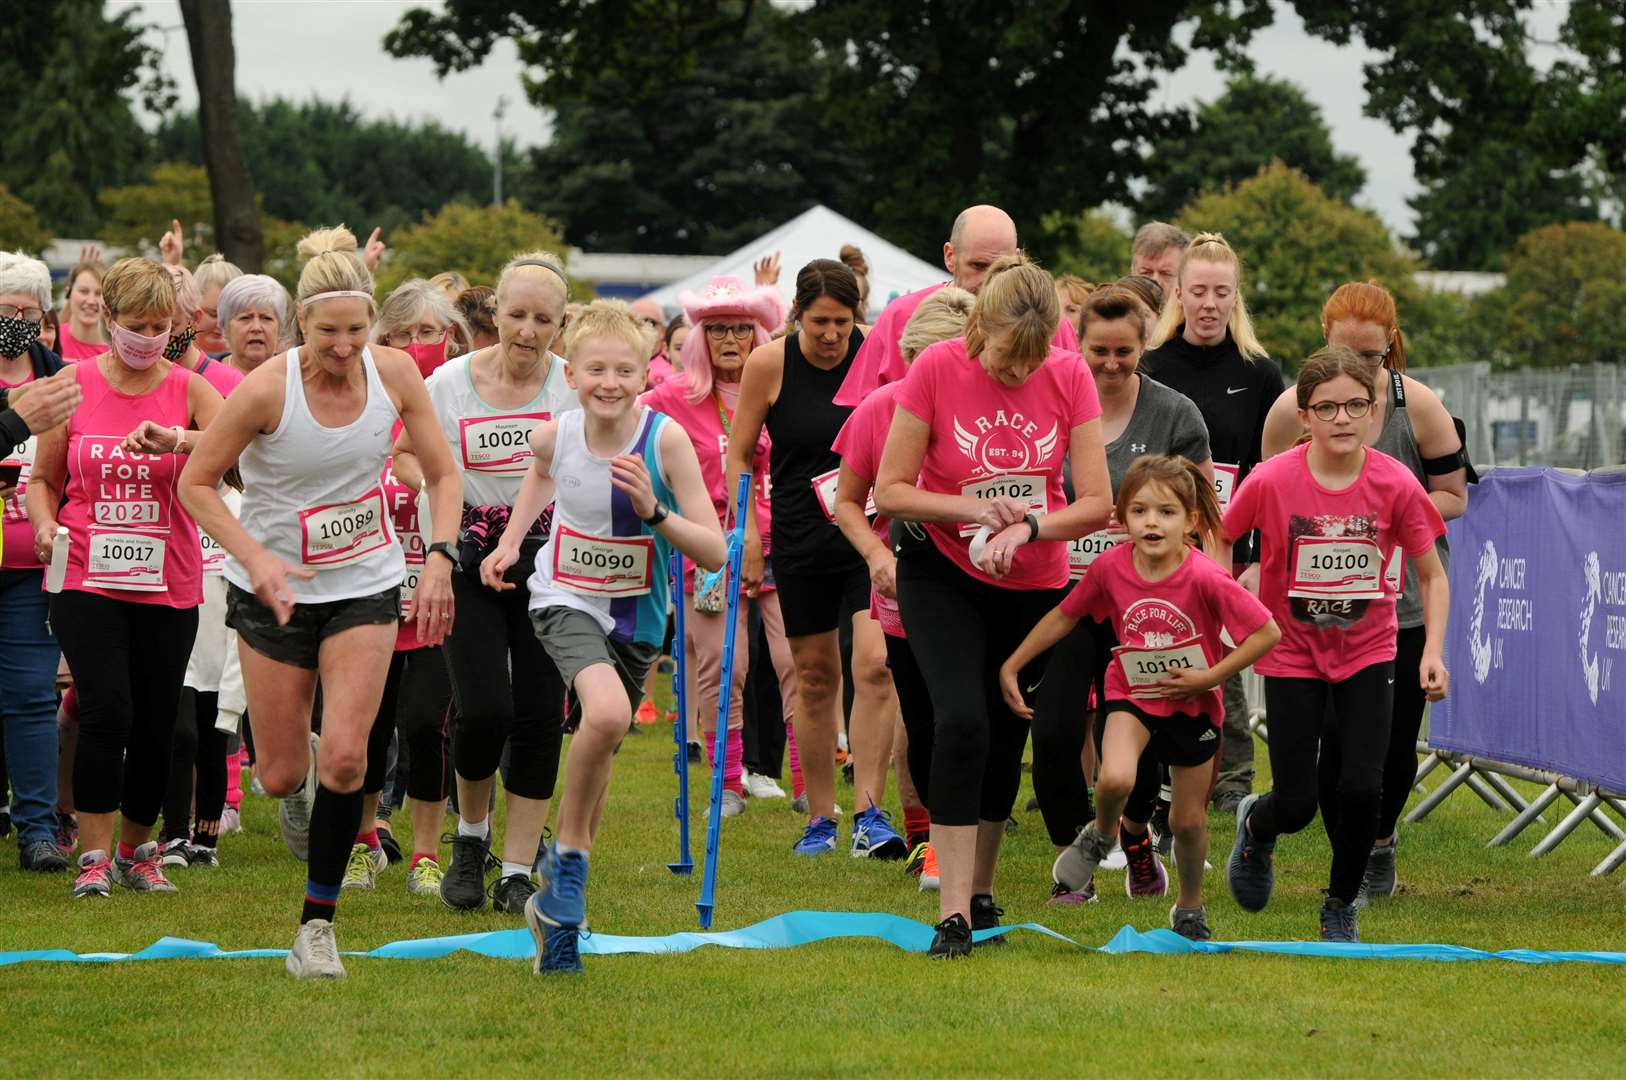 Race for Life 5km 29th August 2021: The start of the race.Picture: James Mackenzie.